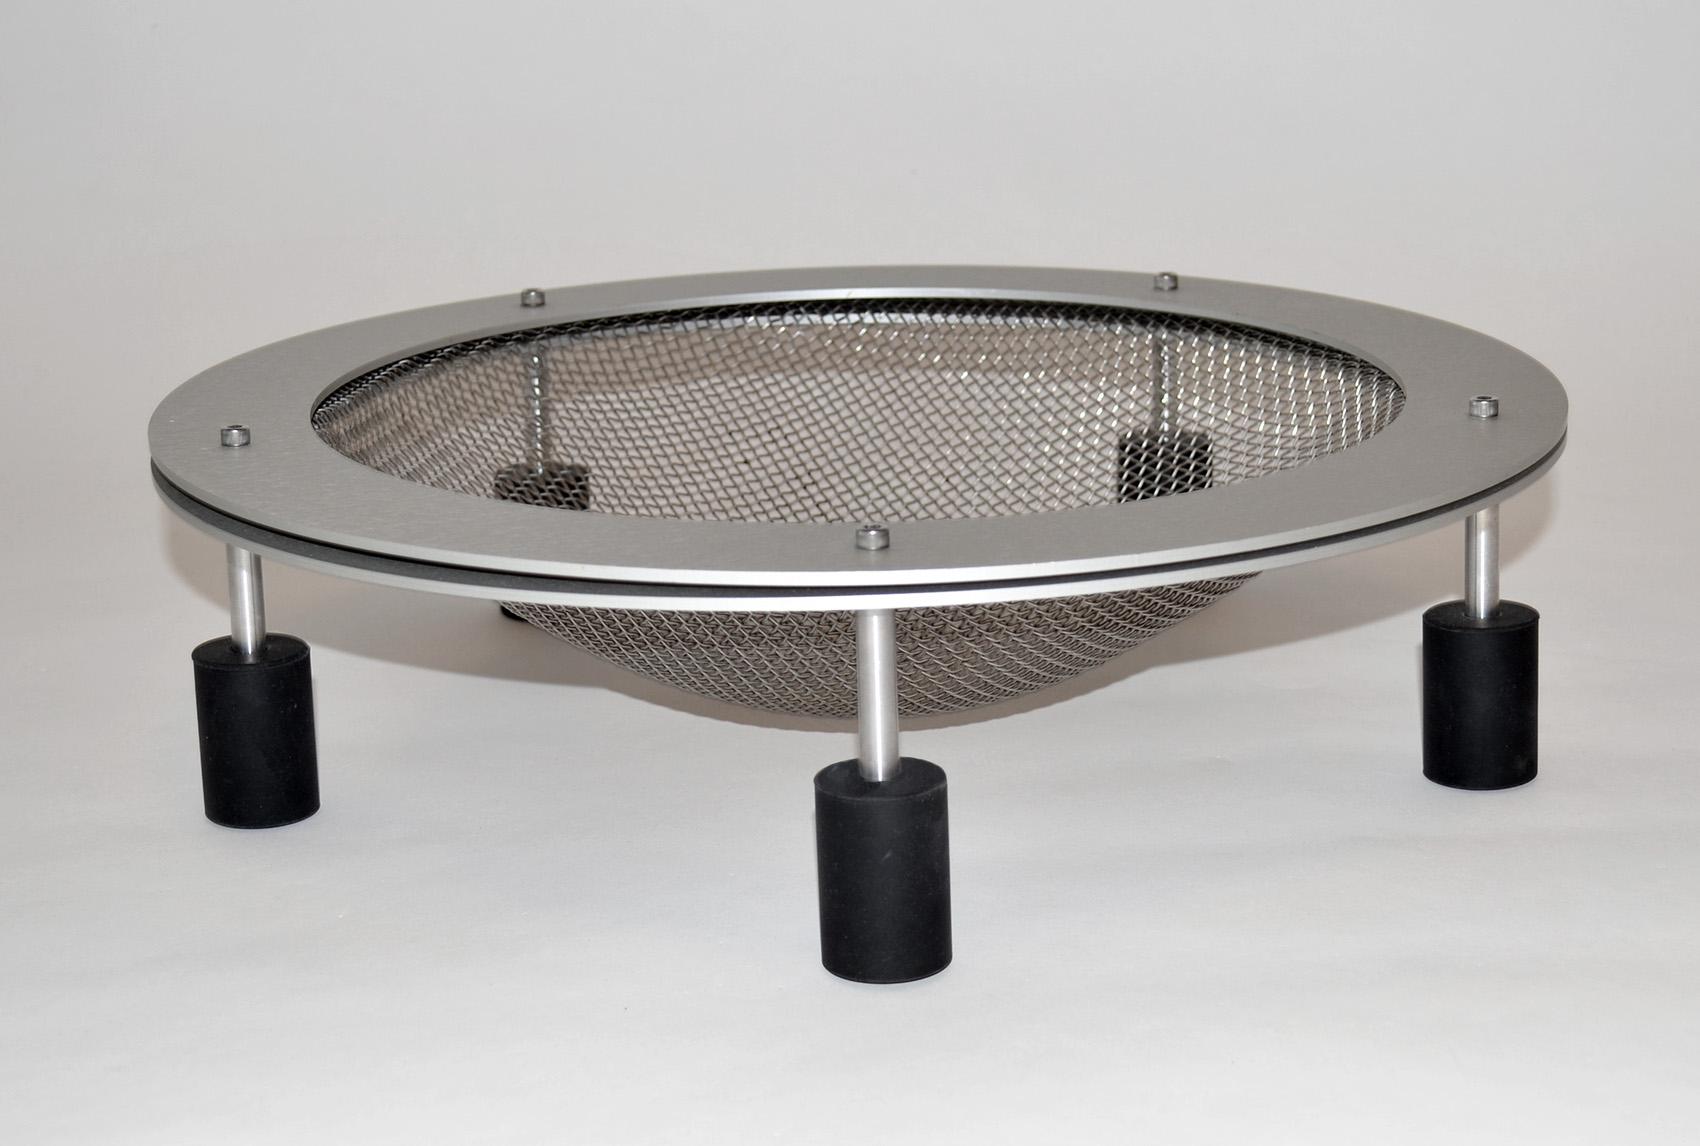 Post Modern Fruit Bowl, Basket, Catch All or Vide-Poche 1990s
Machined aluminum mesh screen supported by aluminum legs with metal fasteners on rubber feet. Created by HOK Product Design. Purchased from the BP building, Cleveland, OH. HOK label on